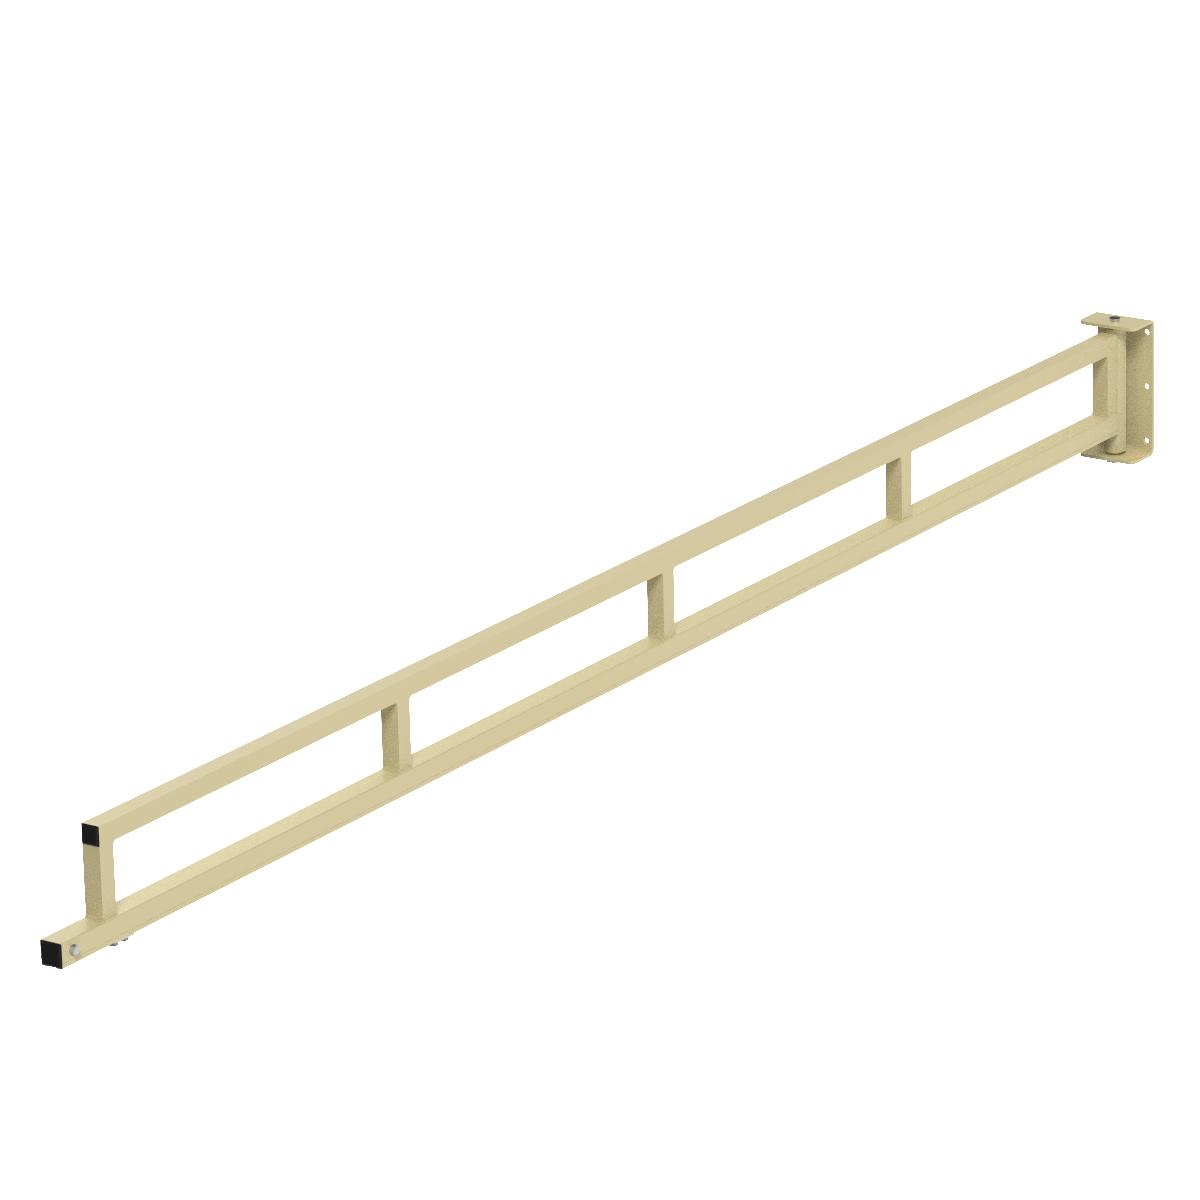 Hubbell WS50-WS10 WS50 Rail 10', For Loads Up To 50 Lbs., Beige Polyester Finish  ; Fixed or 180° Swinging WS50 Booms ; Rail for loads up to 50 lbs.(22.5 kg)